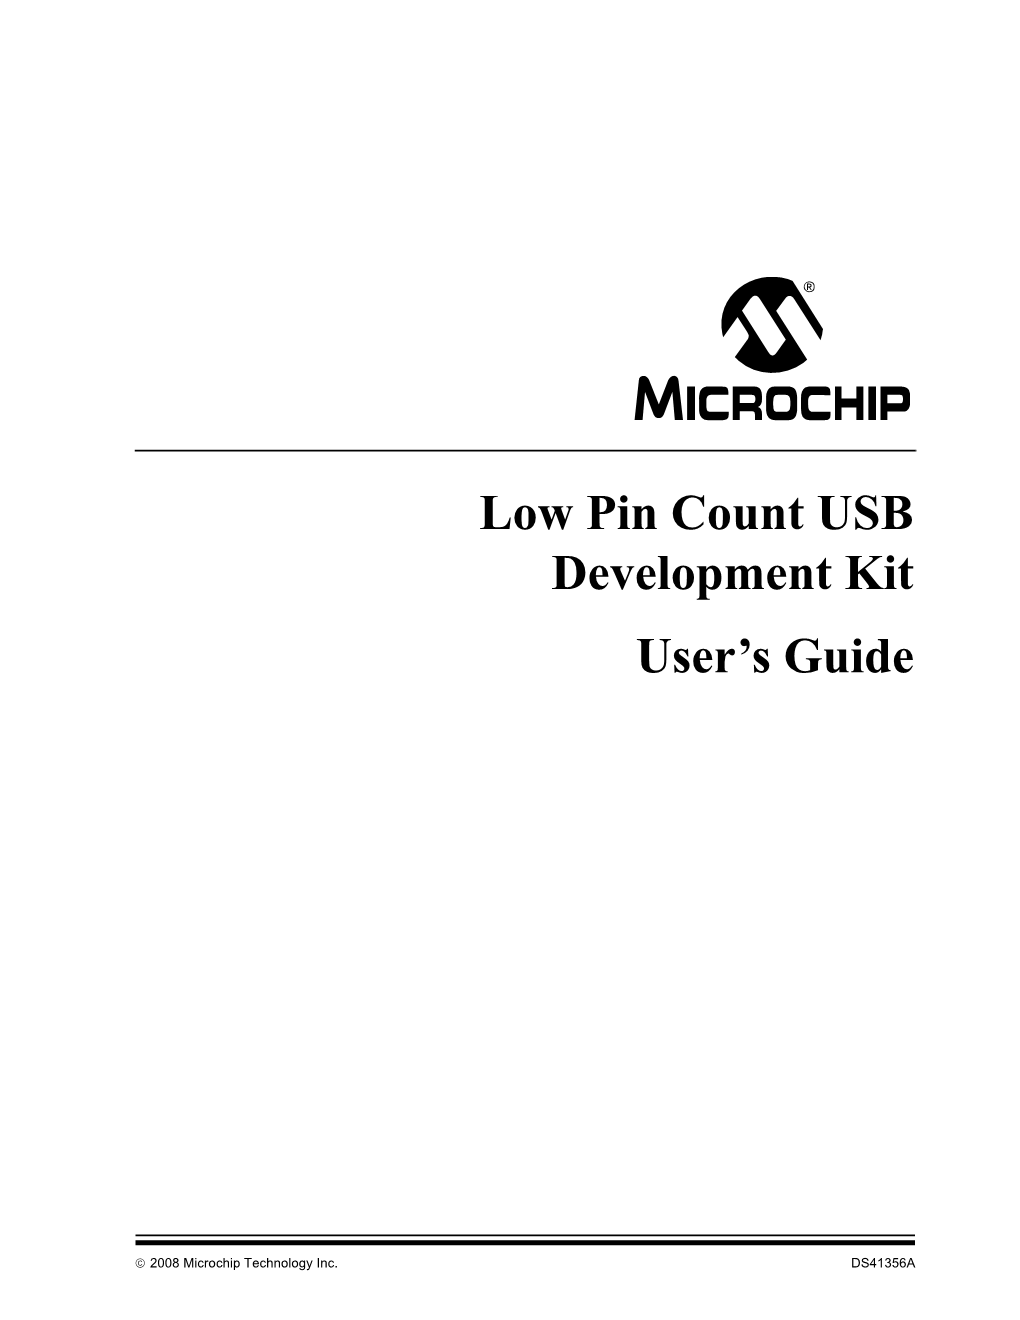 Low Pin Count USB Development Kit User's Guide